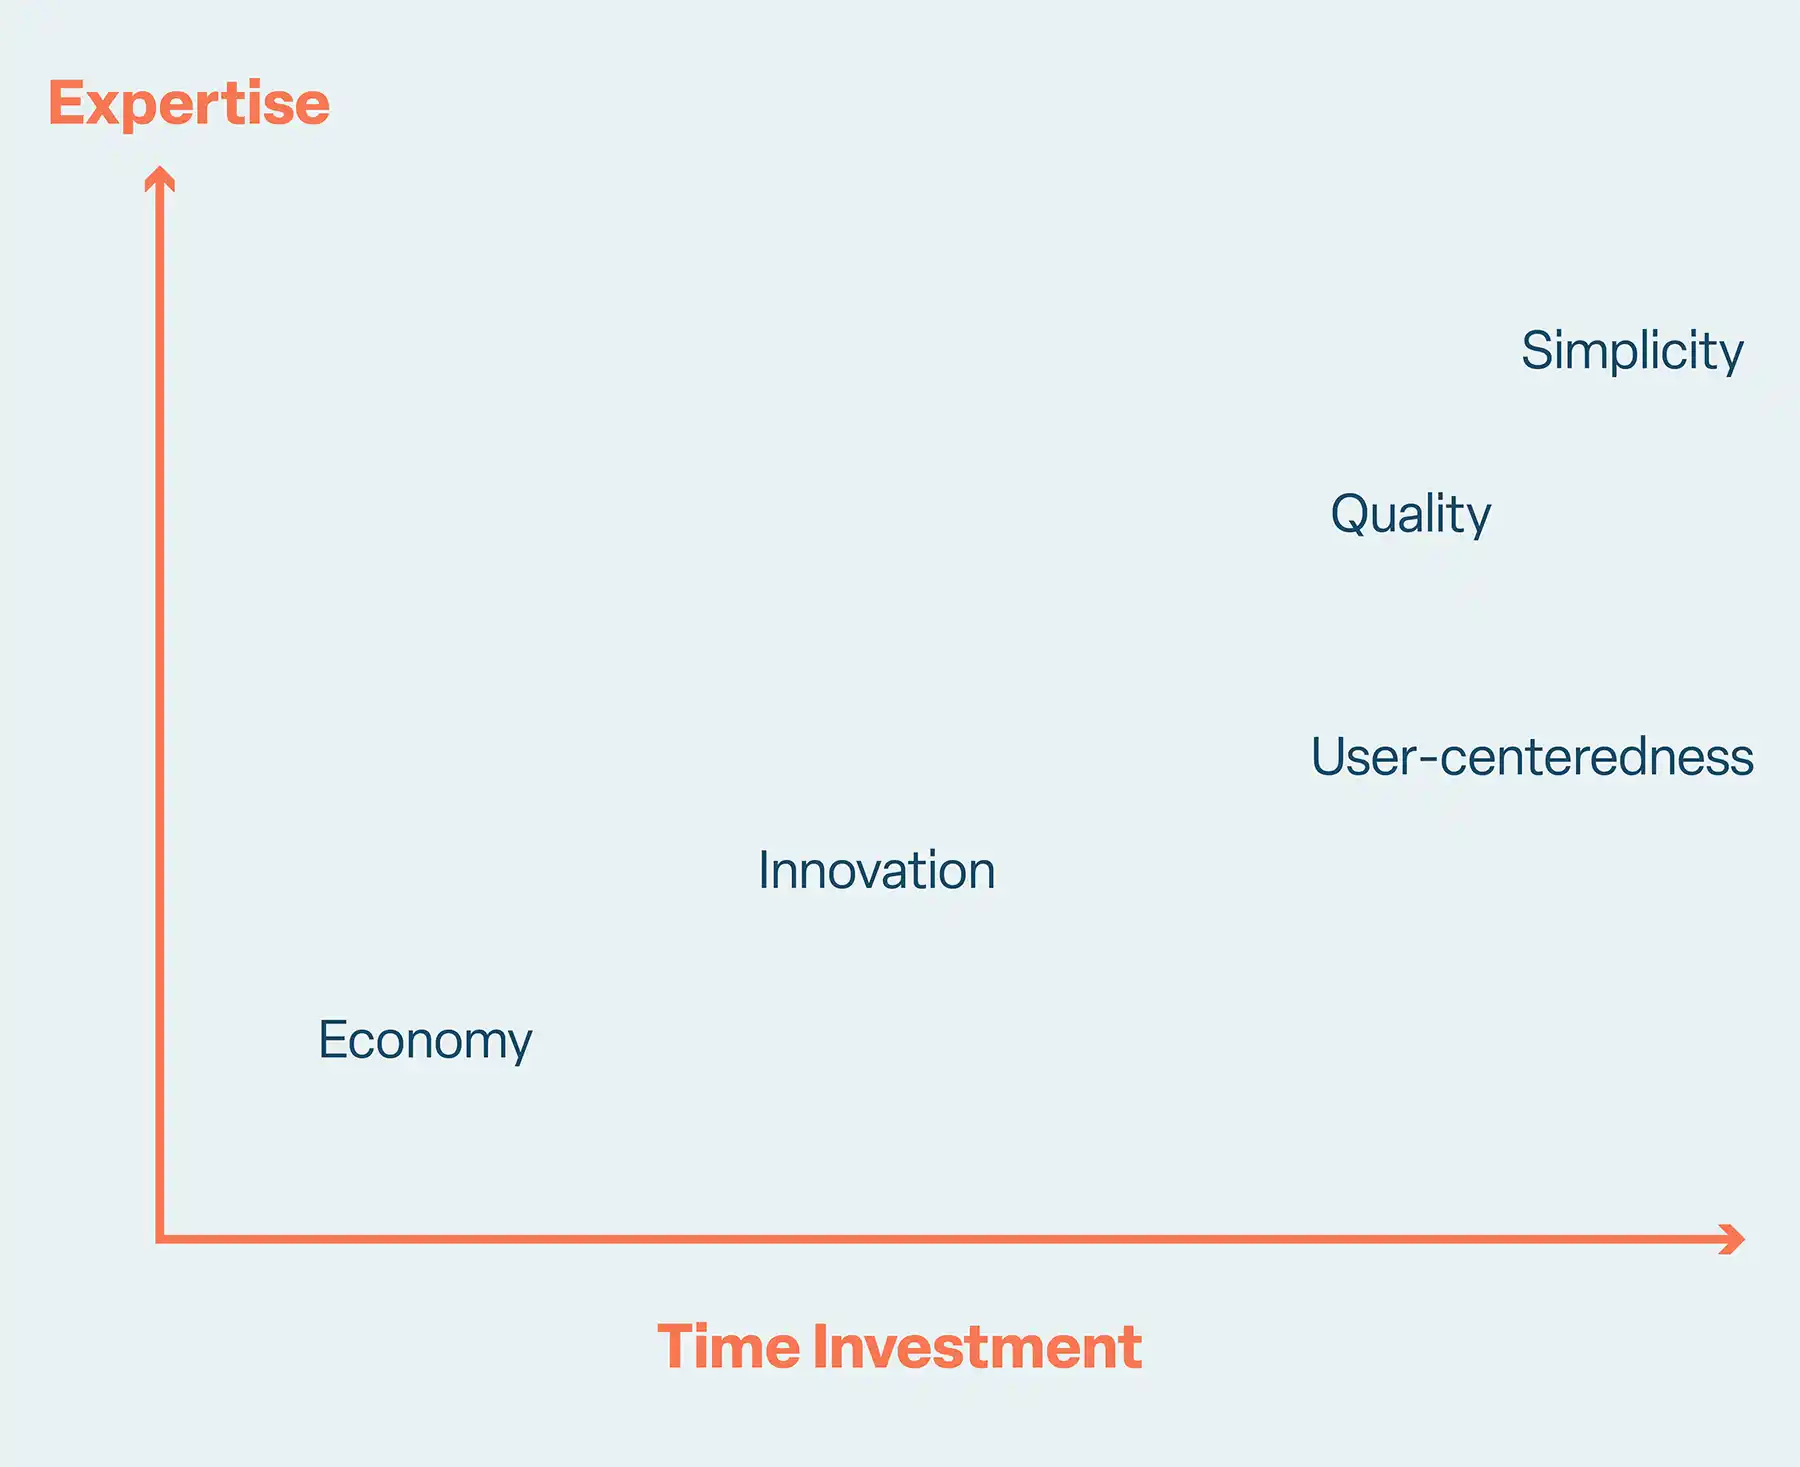 A graph plotting the 5 qualities mentioned on a graph of expertise vs. time investment. 